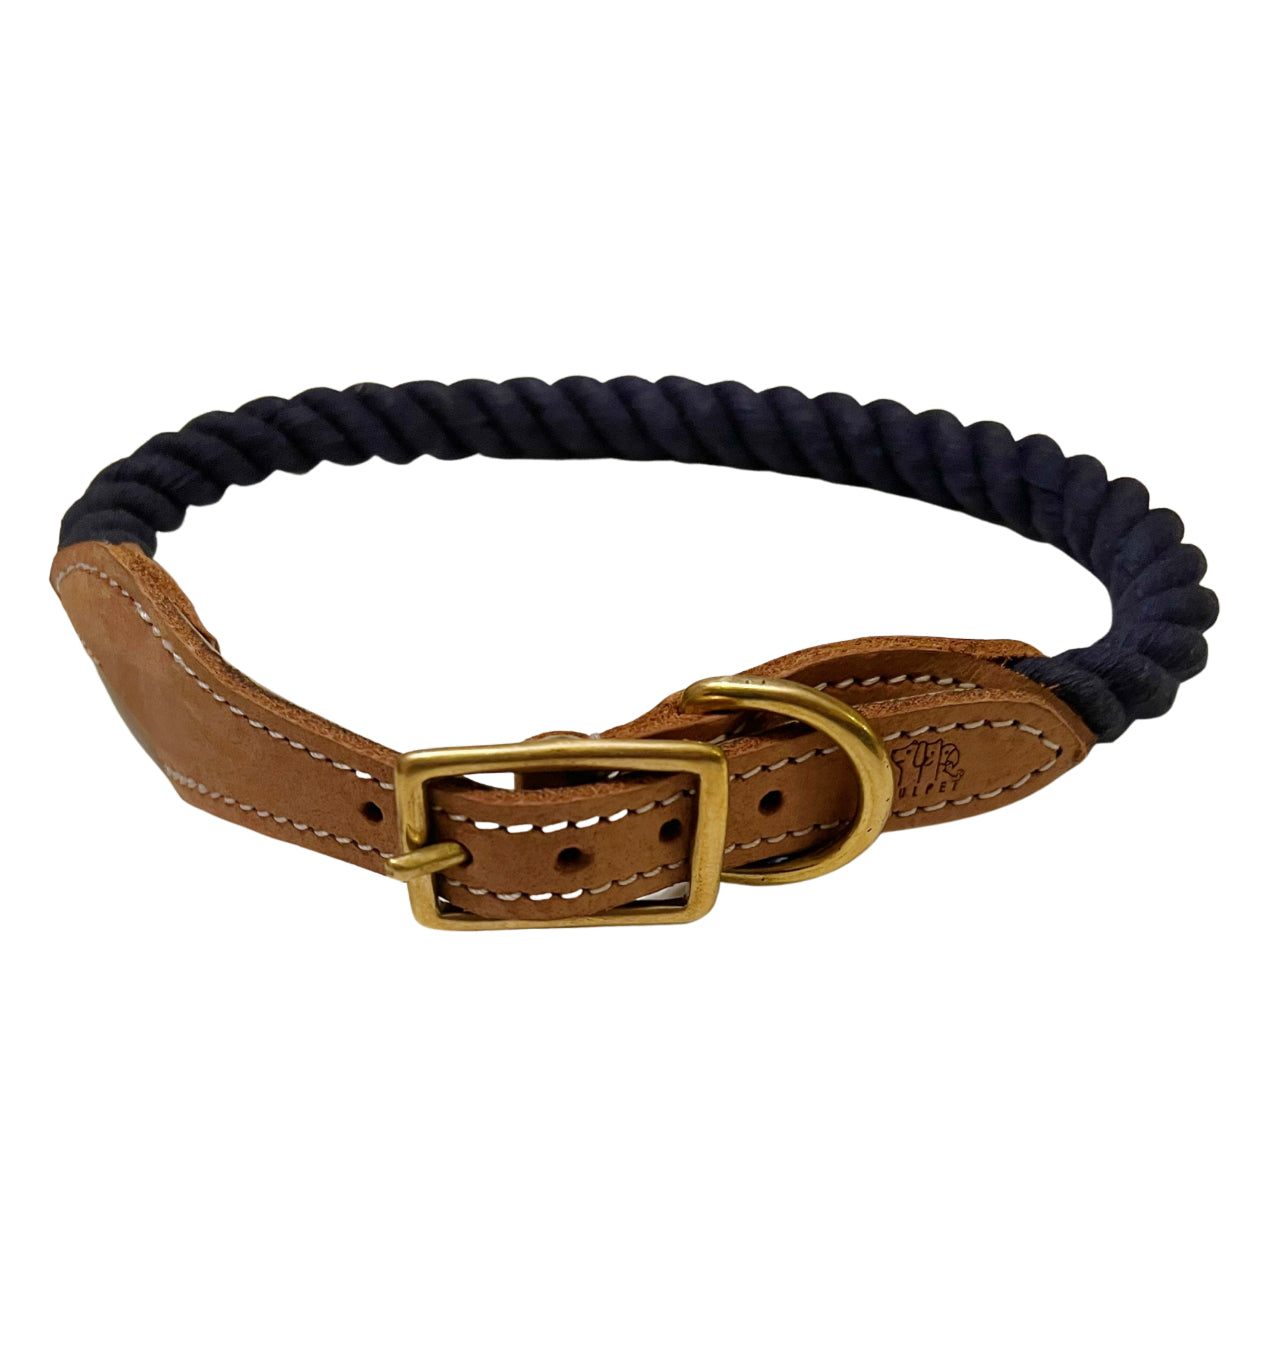 blu&ben Leather Dog Collar Soft & Durable Strong Waterproof Collars  Adjustable for Small Mudium Large Dogs Brown S